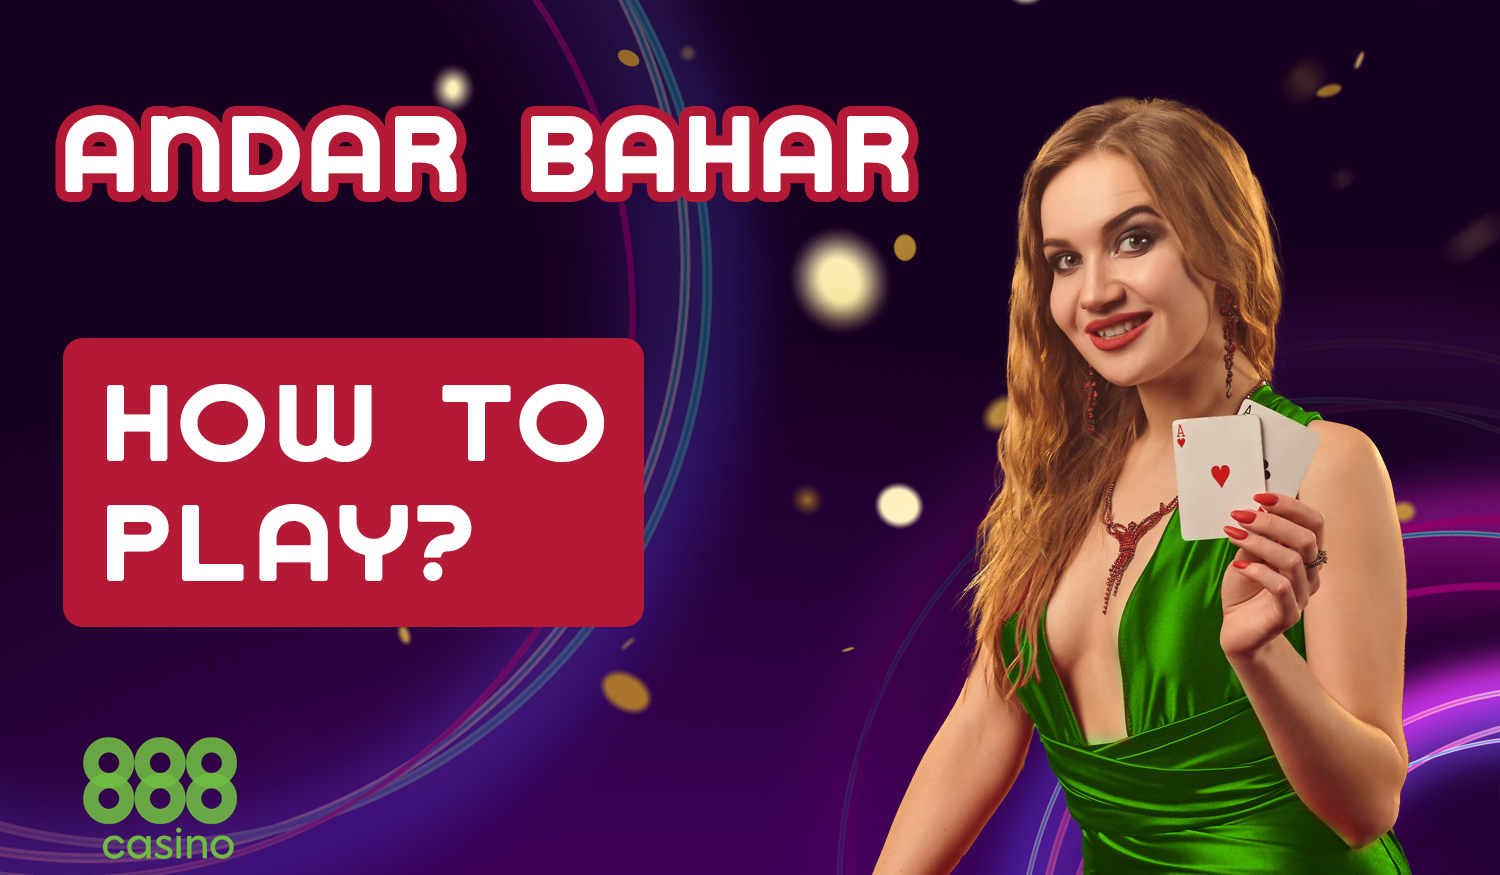 Instructions for new 888 casino users from India on how to start playing Andar Bahar